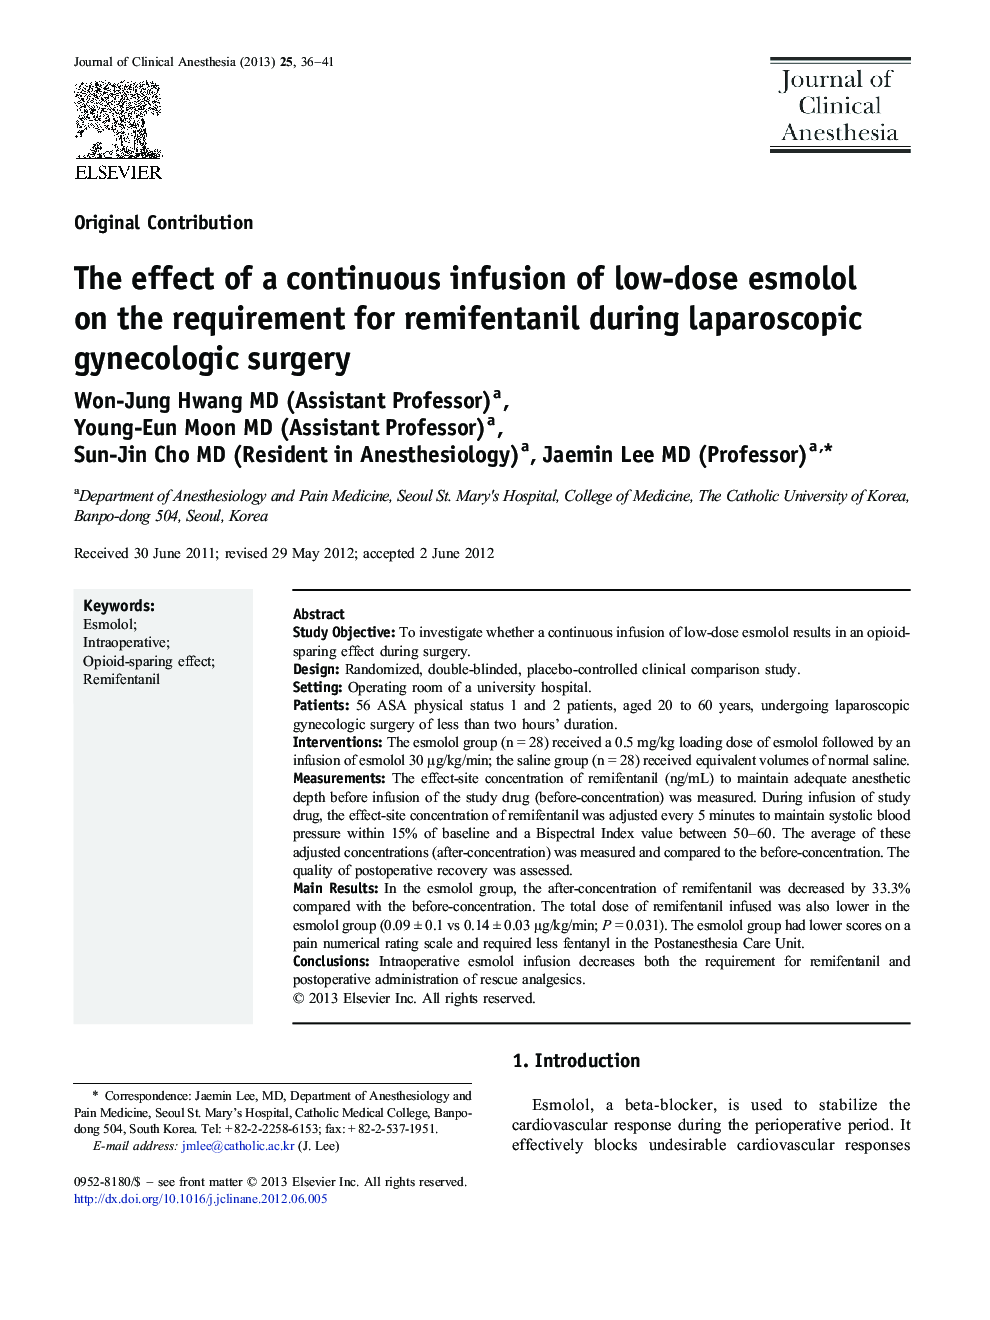 The effect of a continuous infusion of low-dose esmolol on the requirement for remifentanil during laparoscopic gynecologic surgery